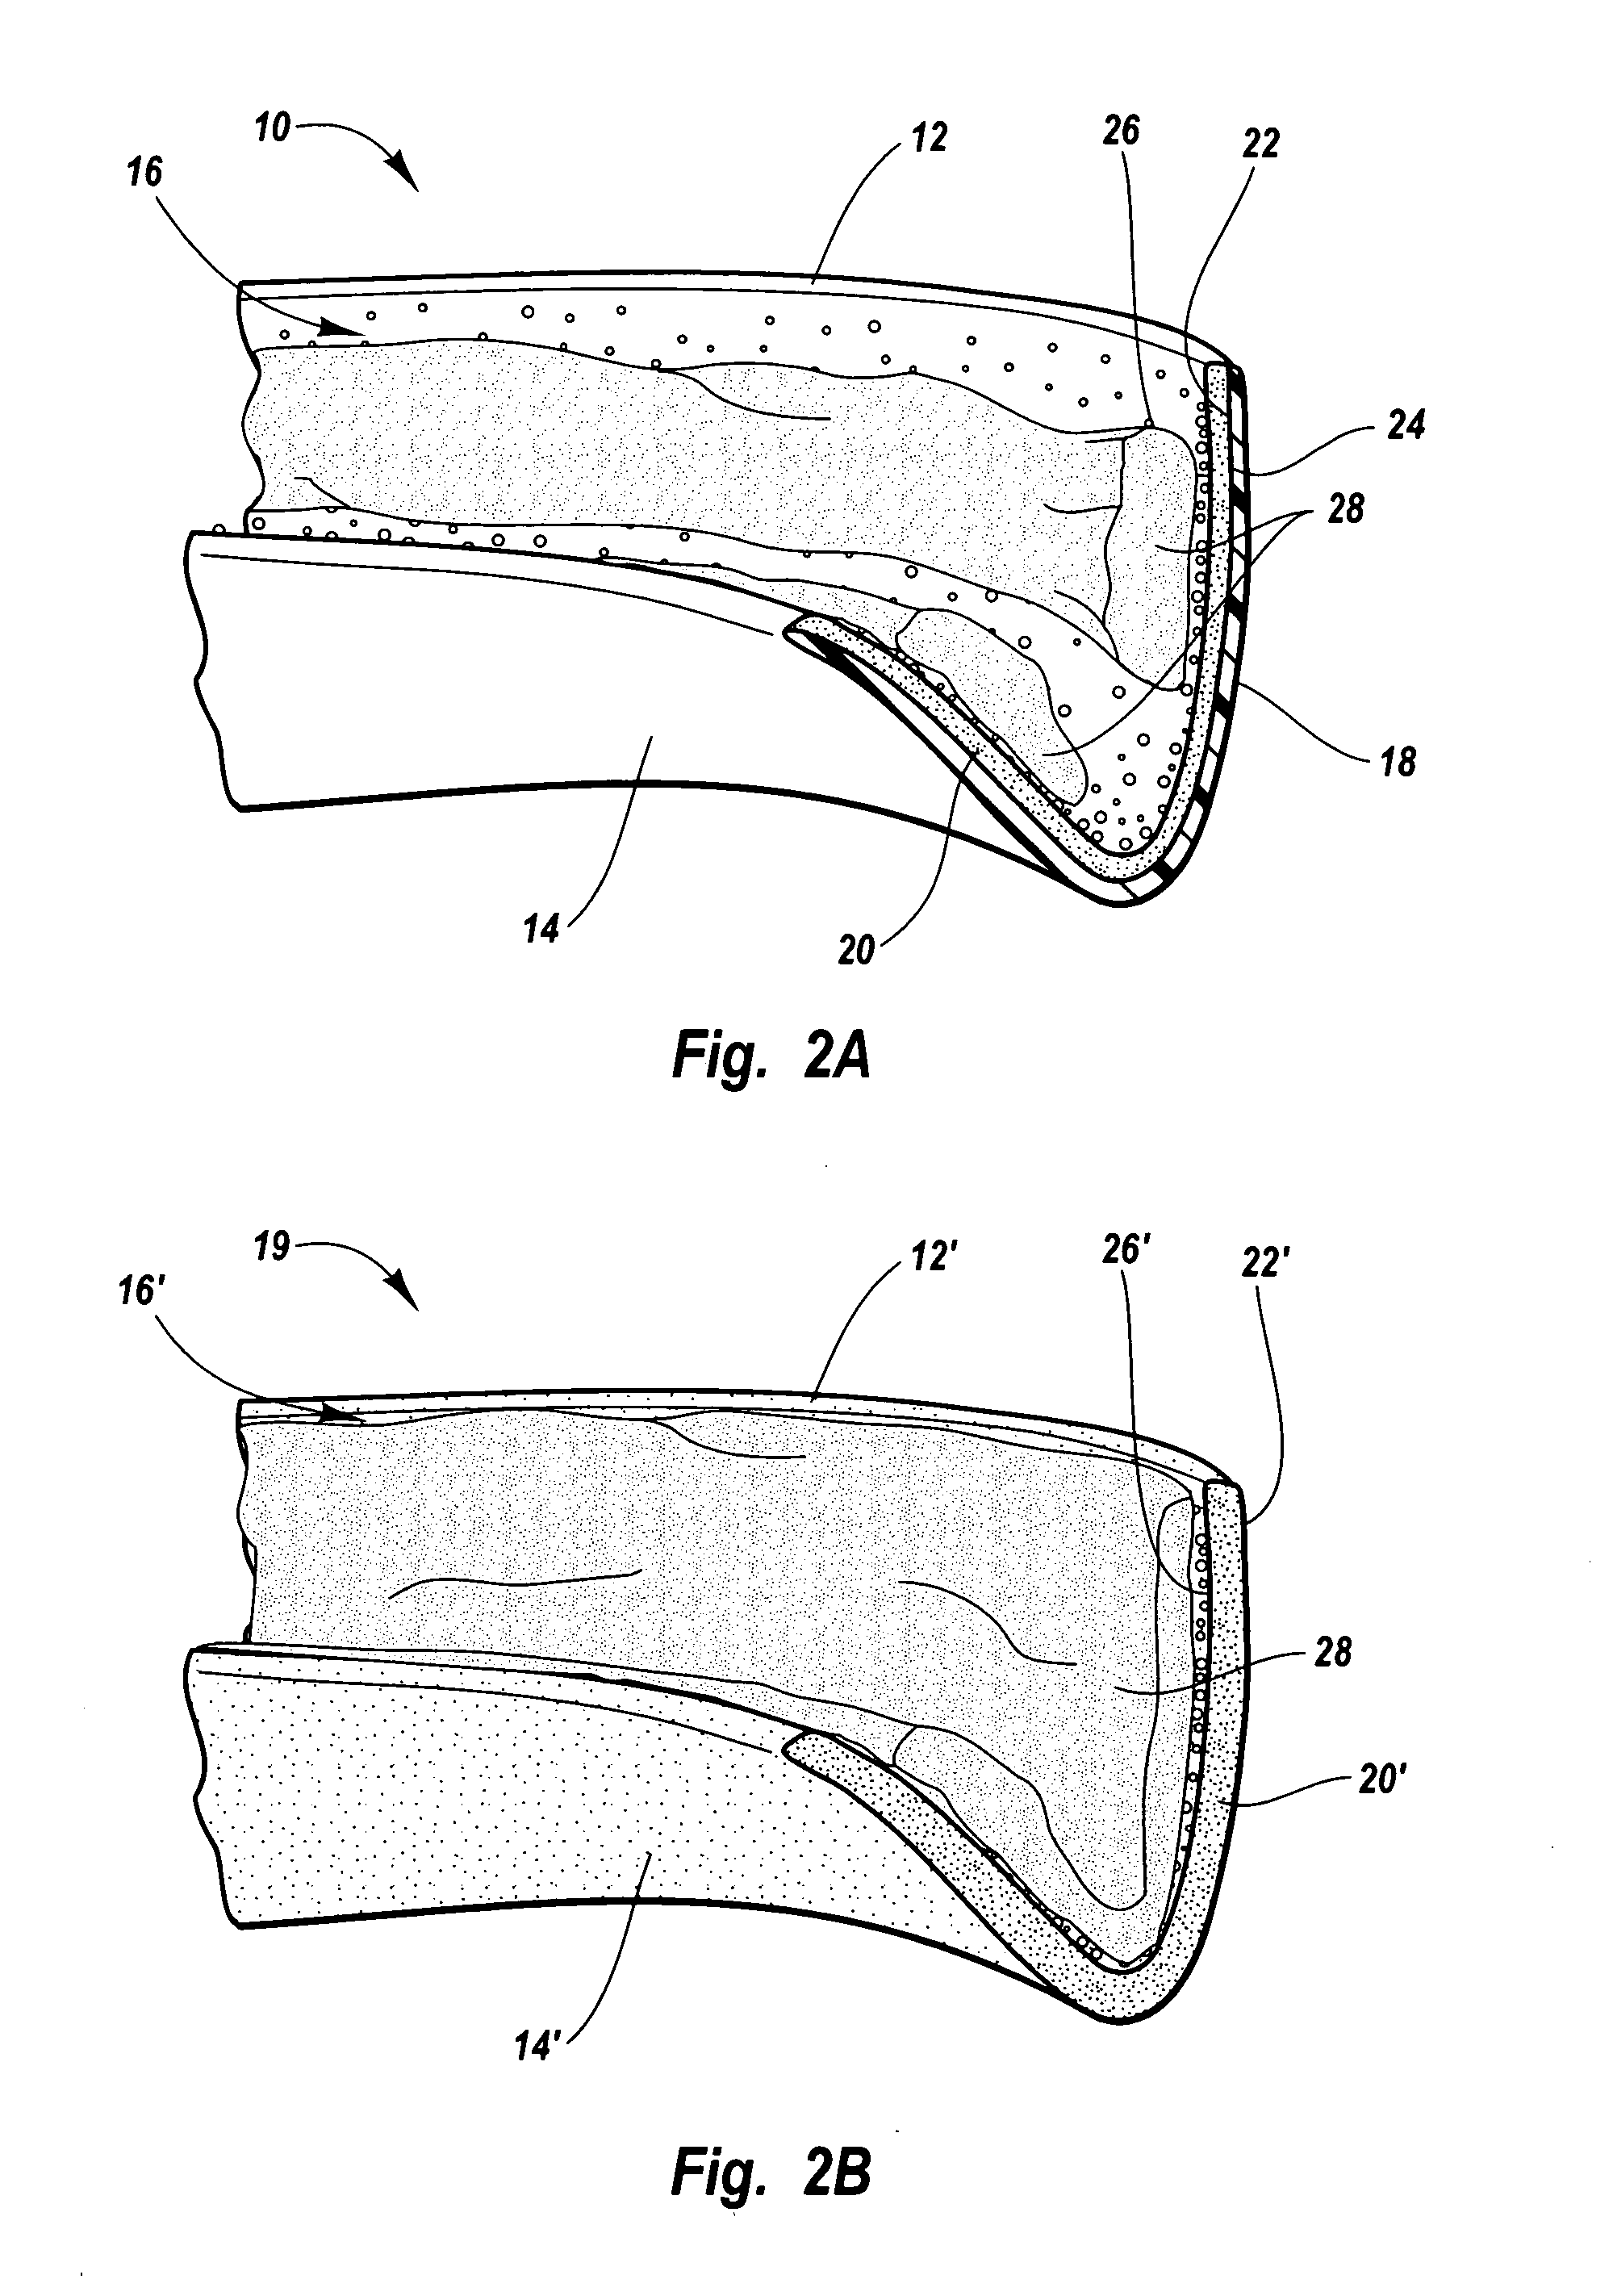 Bleaching compositions and devices having a solid adhesive layer and bleaching gel adjacent thereto